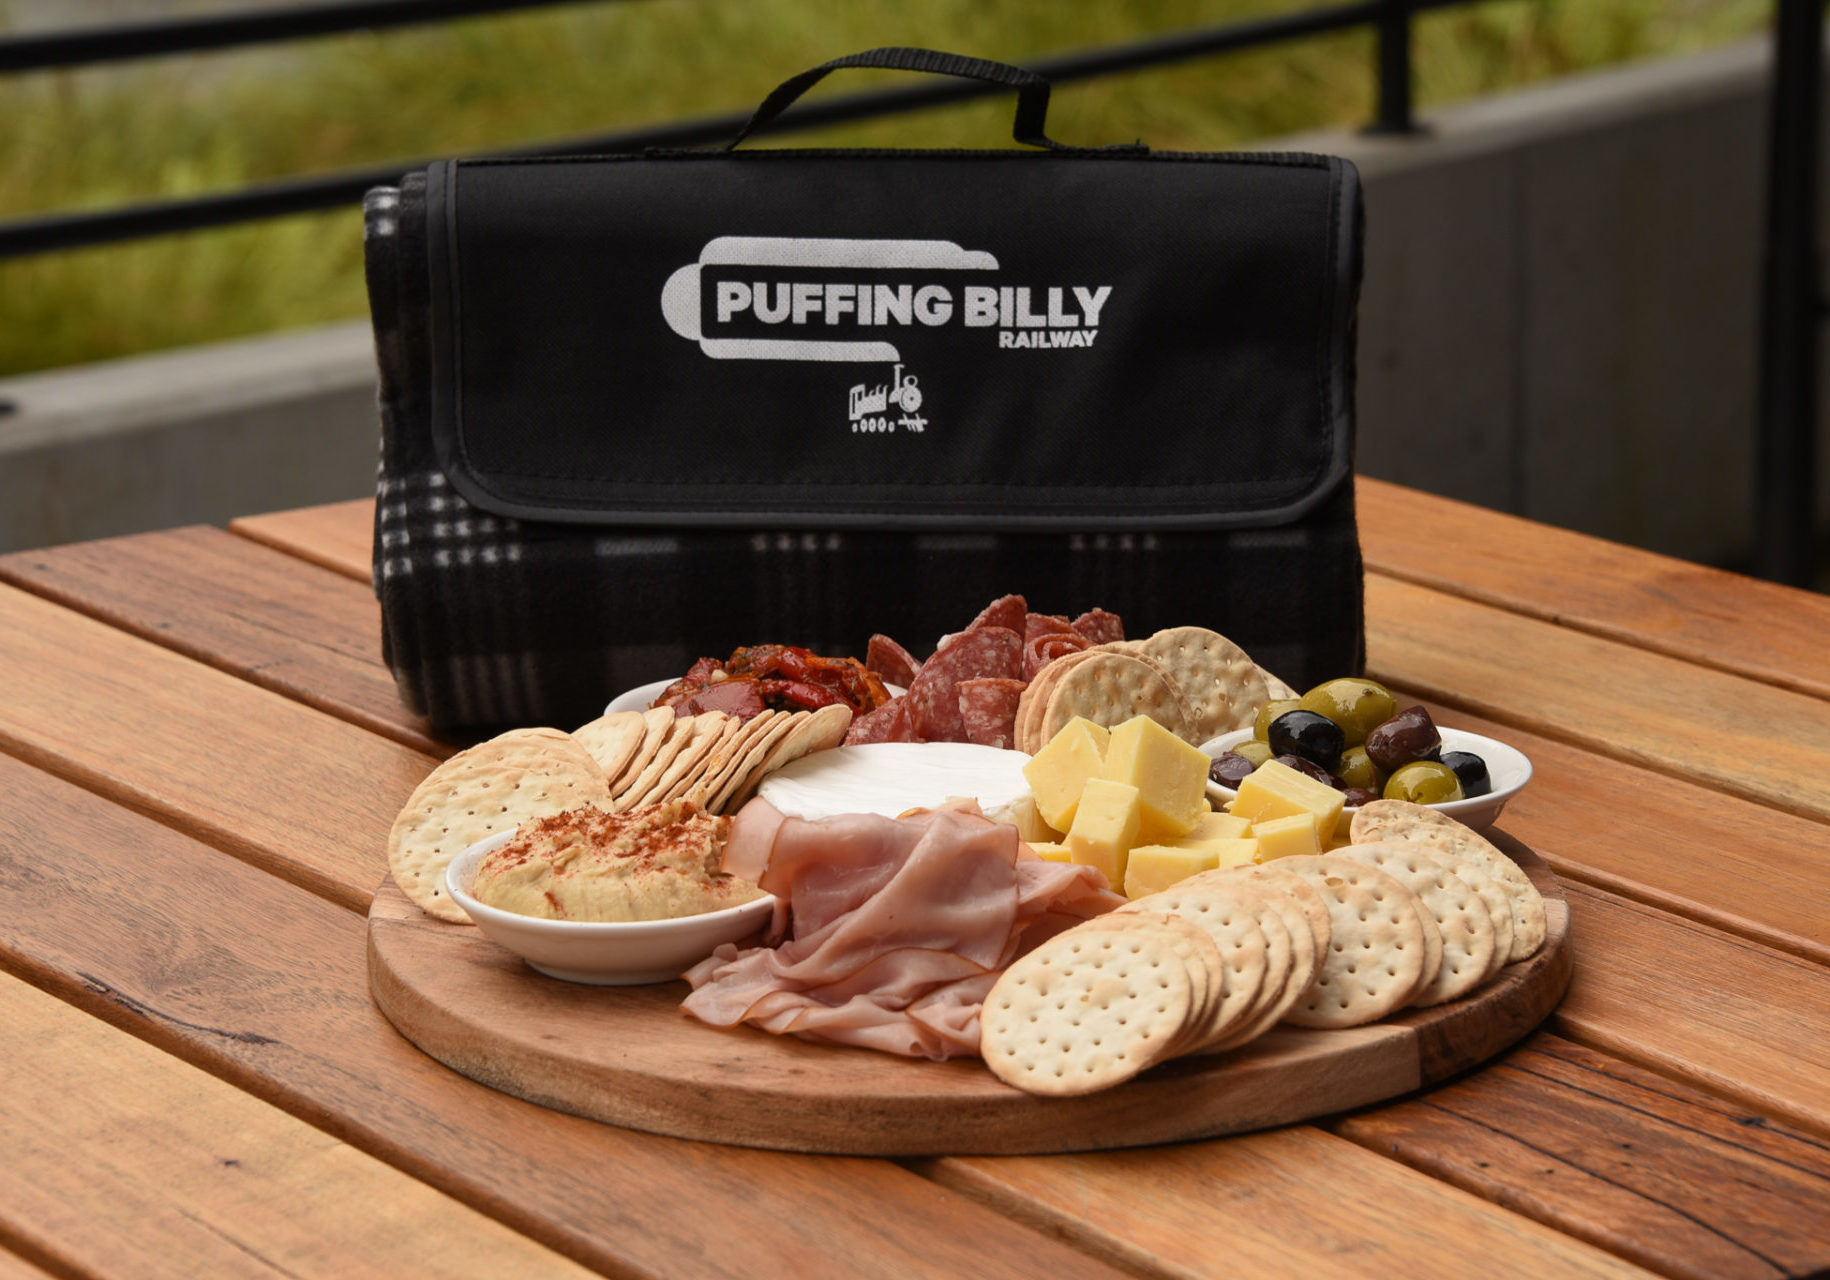 Puffing Billy Grazing Box and picnic blanket.